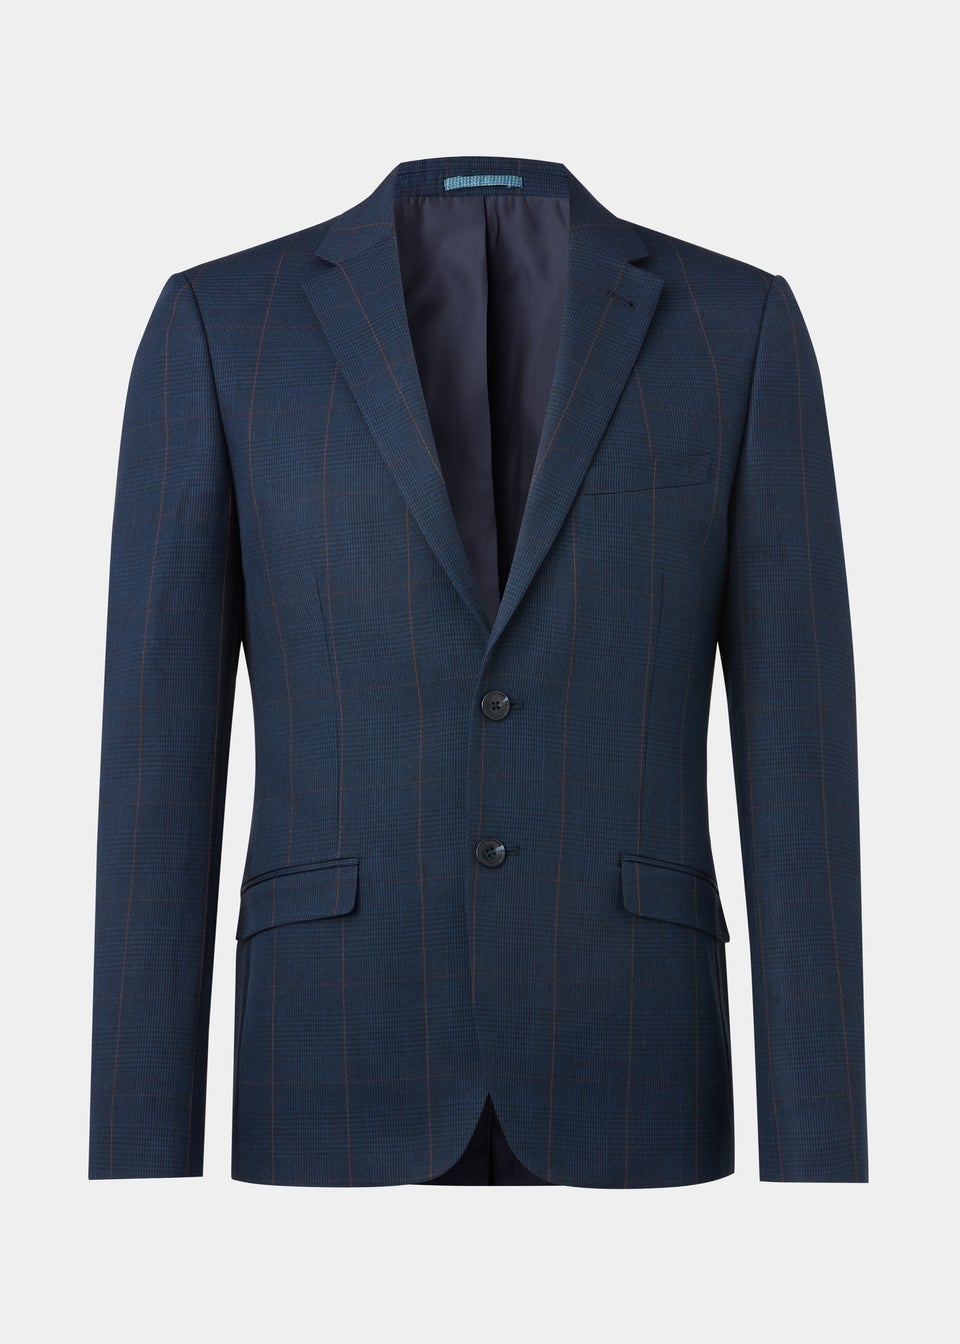 Taylor & Wright Westminster Navy Skinny Fit Suit Jacket